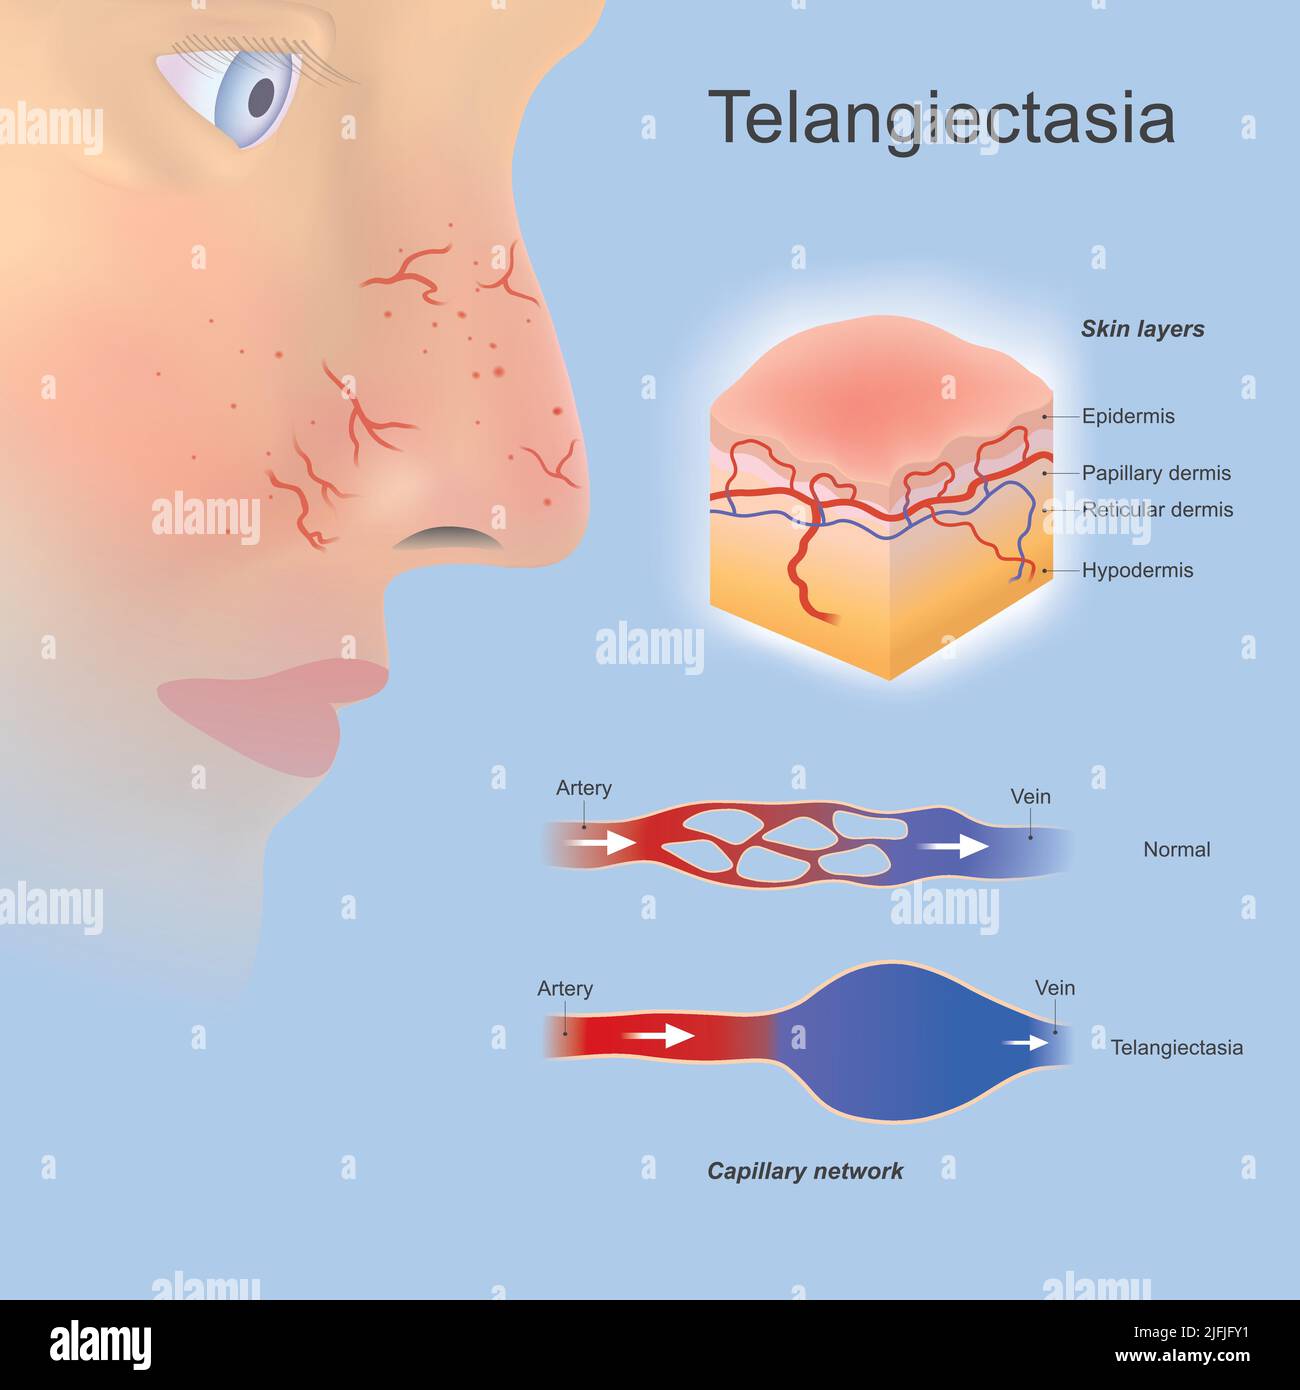 Telangiectasia. Problem tiny blood vessels widened or formed located near surface skin layers and you can clearly see. Stock Vector